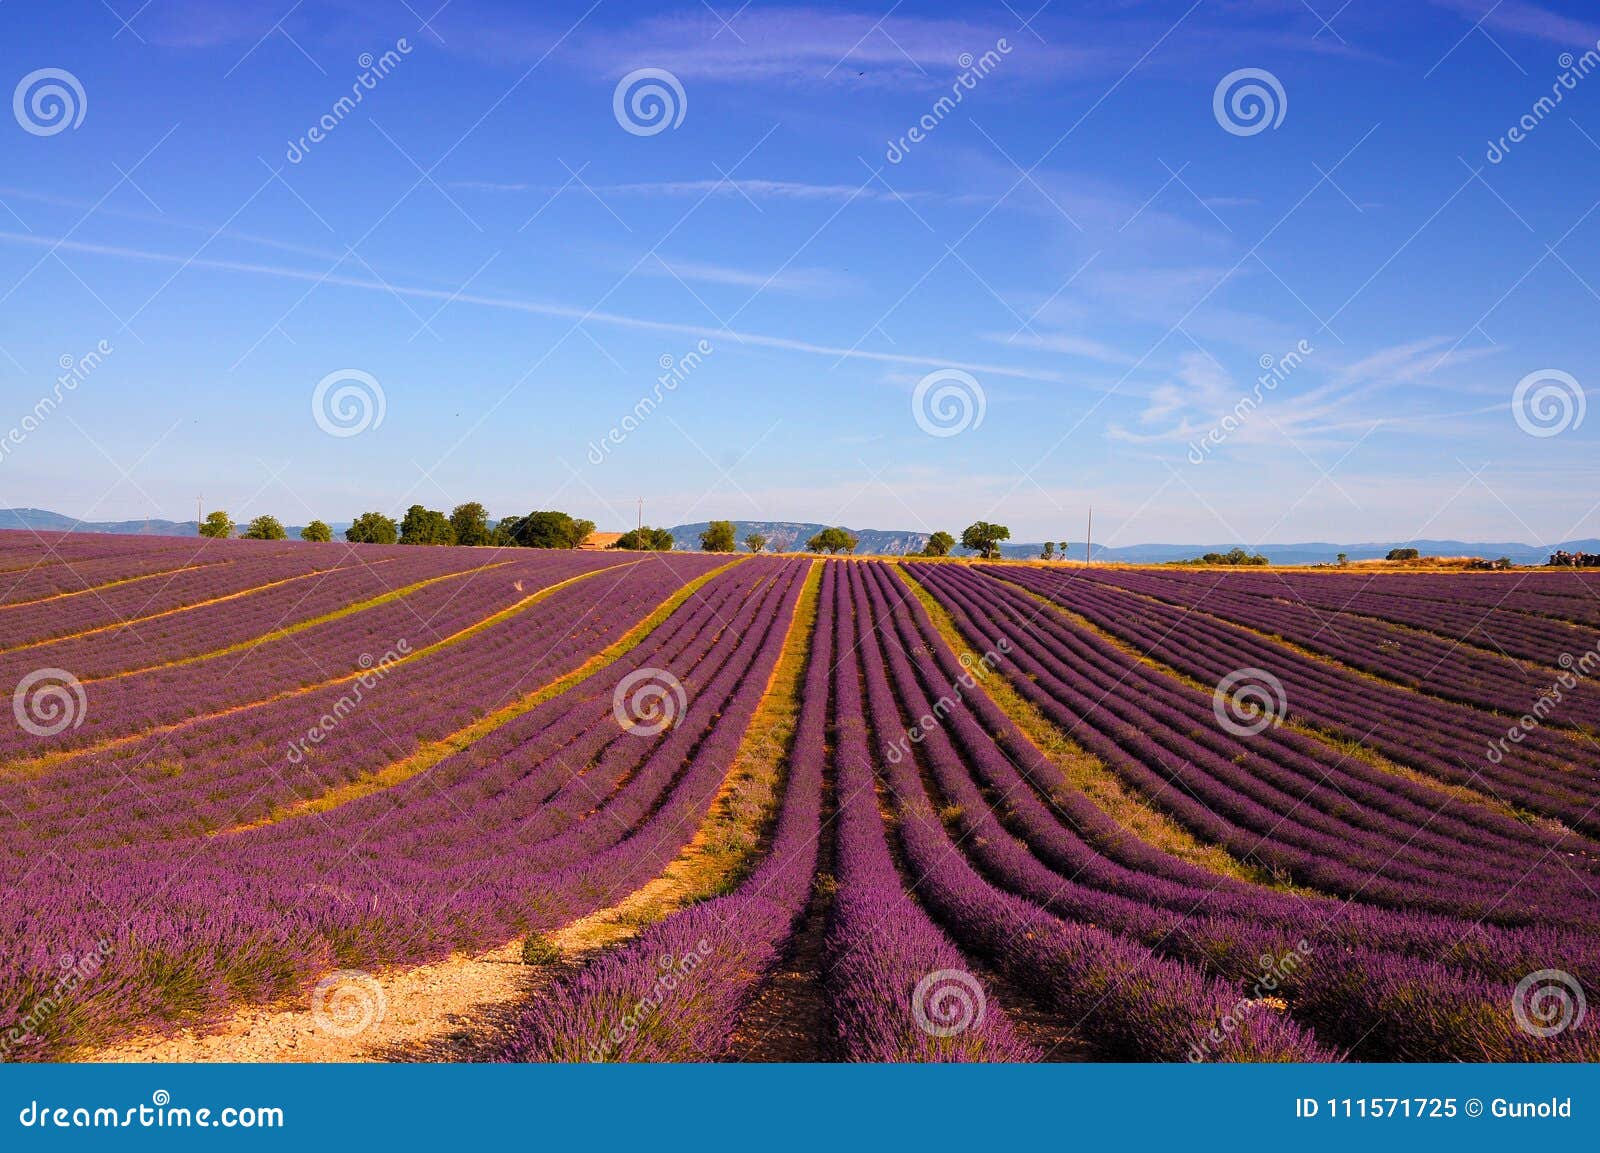 Lavender Field with Bright Purple Flowers Stock Image - Image of ...